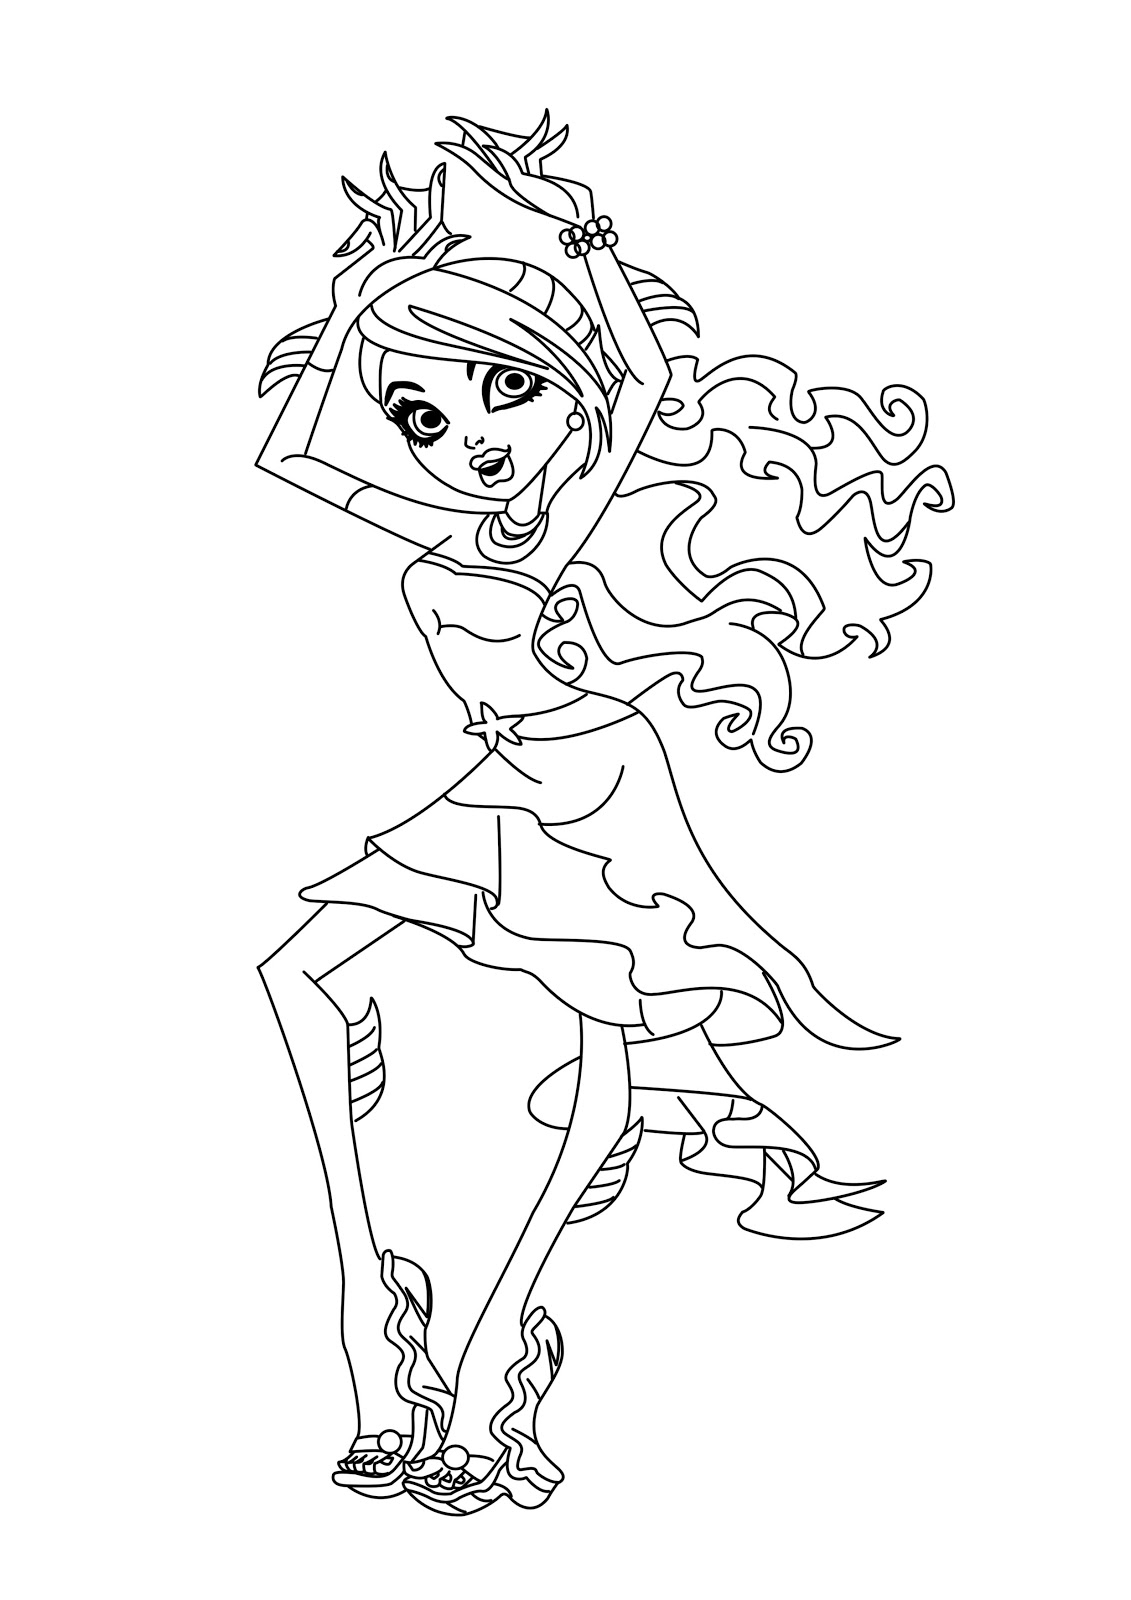 Monster High Coloring Pages Free Printable Coloring Books Free Printable Monster High Coloring Pages For Kids